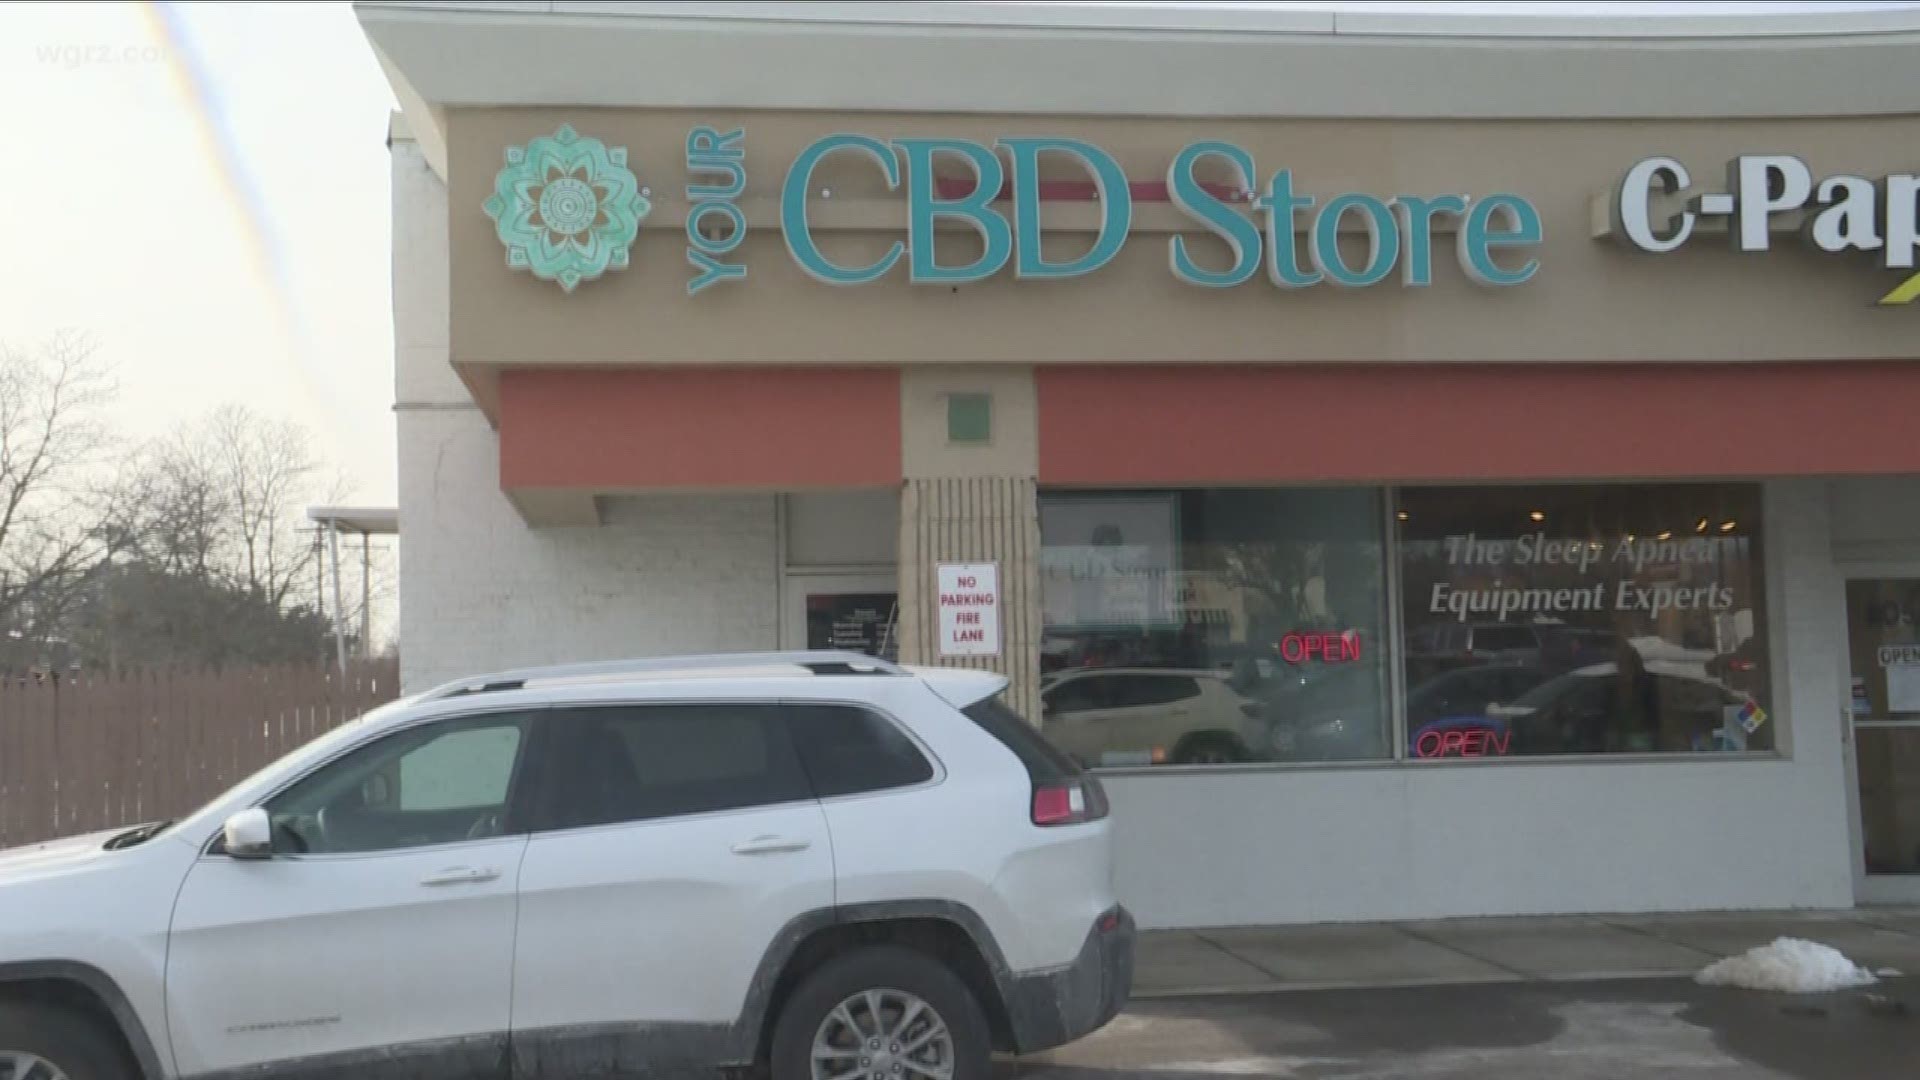 it's a national franchise that sells only C-B-D hemp products.